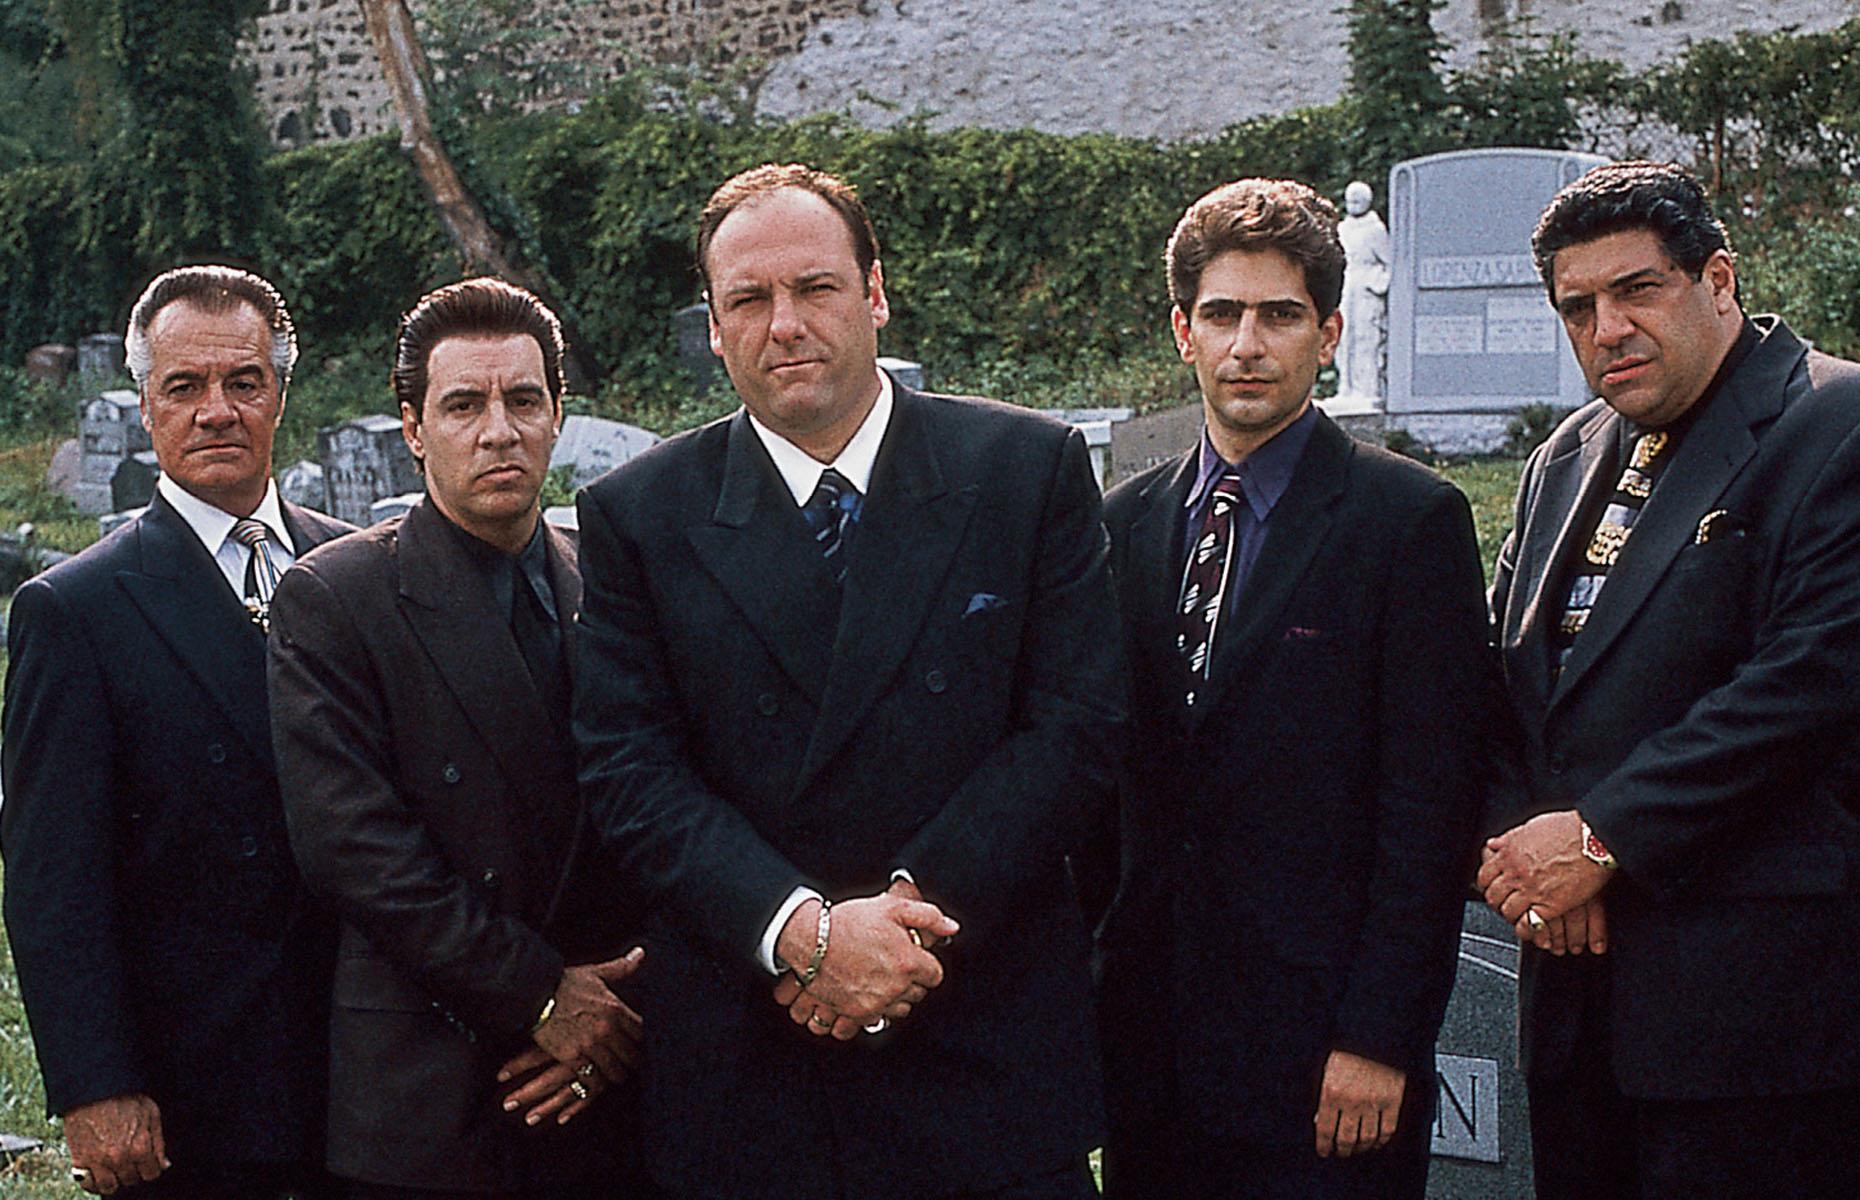 <p>HBO's hit crime-drama series <em>The Sopranos</em> first aired in 1999 and is widely credited with starting the Second Golden Age of Television due to its cinematic production methods. </p>  <p>Following the lives of a gang of New Jersey mobsters, the show ran for six gripping seasons and even spawned a spin-off movie, <em>The Many Saints of Newark</em>, which was released in 2021.</p>  <p>The Emmy-winning show made many of its cast members, including James Gandolfini and Steven Van Zandt, household names.<strong> But which star of <em>The Sopranos</em> became the richest after it ended? Read on to find out.</strong> All dollar amounts are in US dollars.</p>